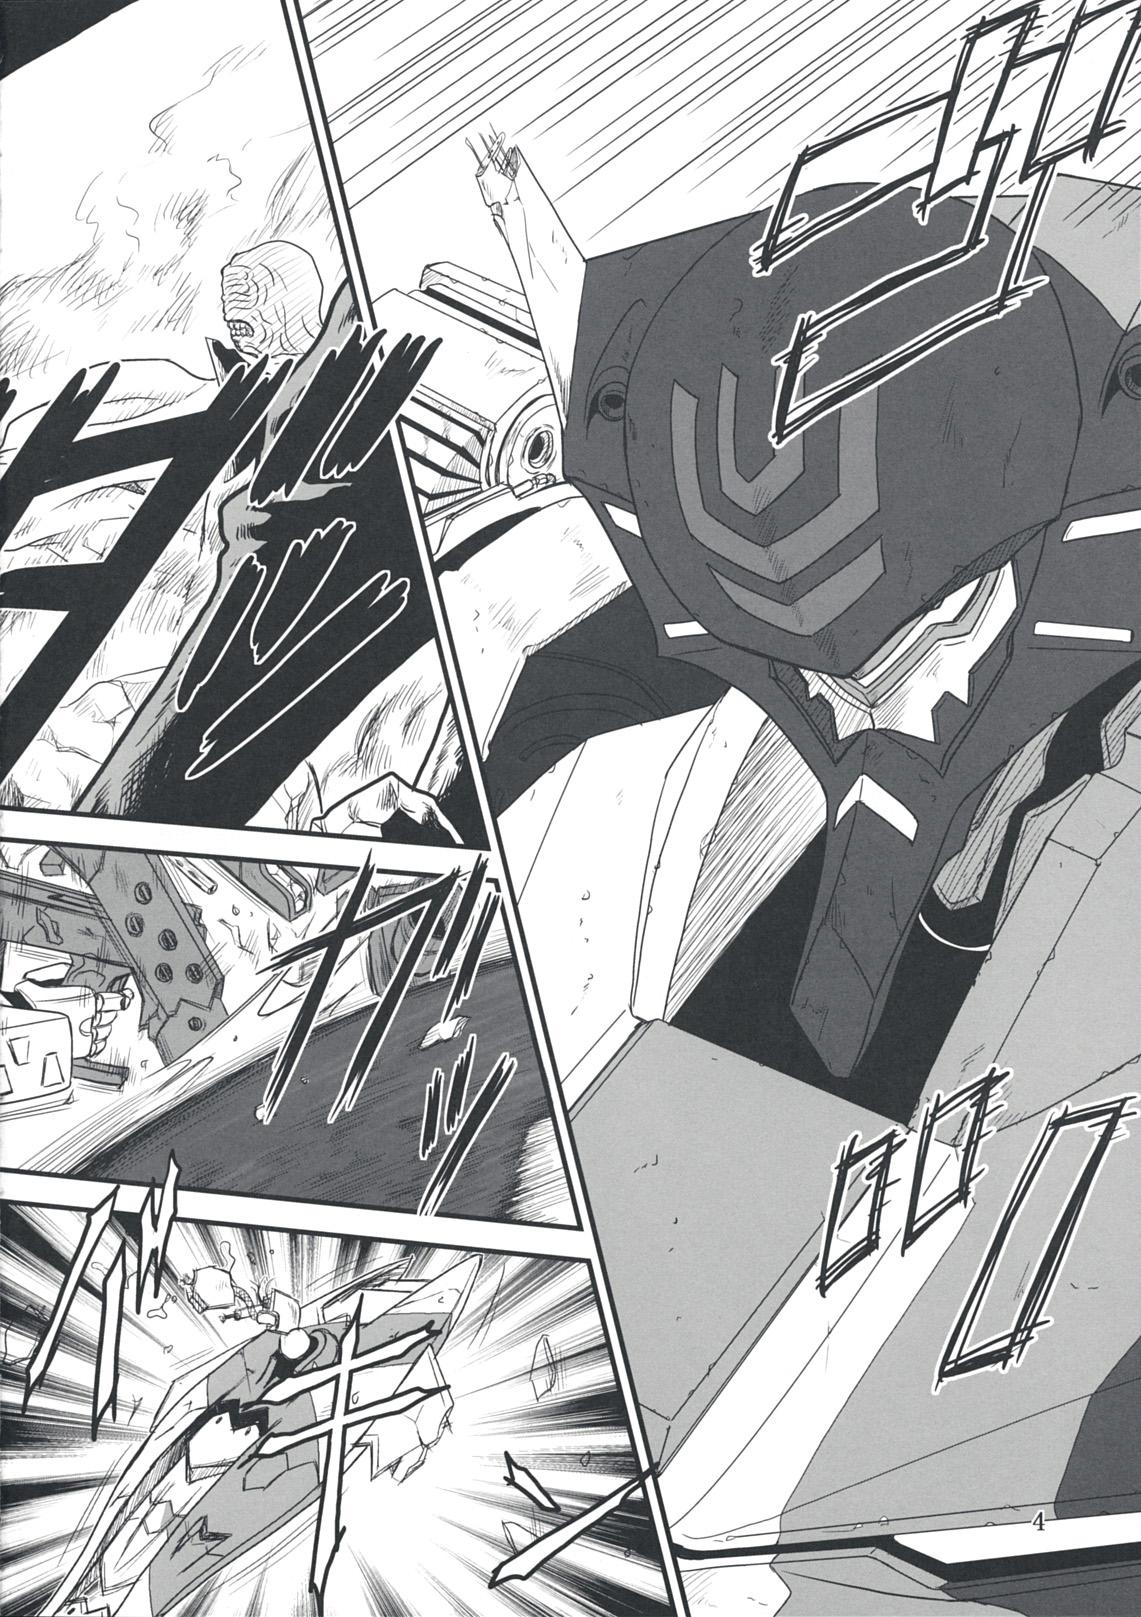 Hindi Tangential Episode - Muv luv alternative total eclipse Amatures Gone Wild - Page 3